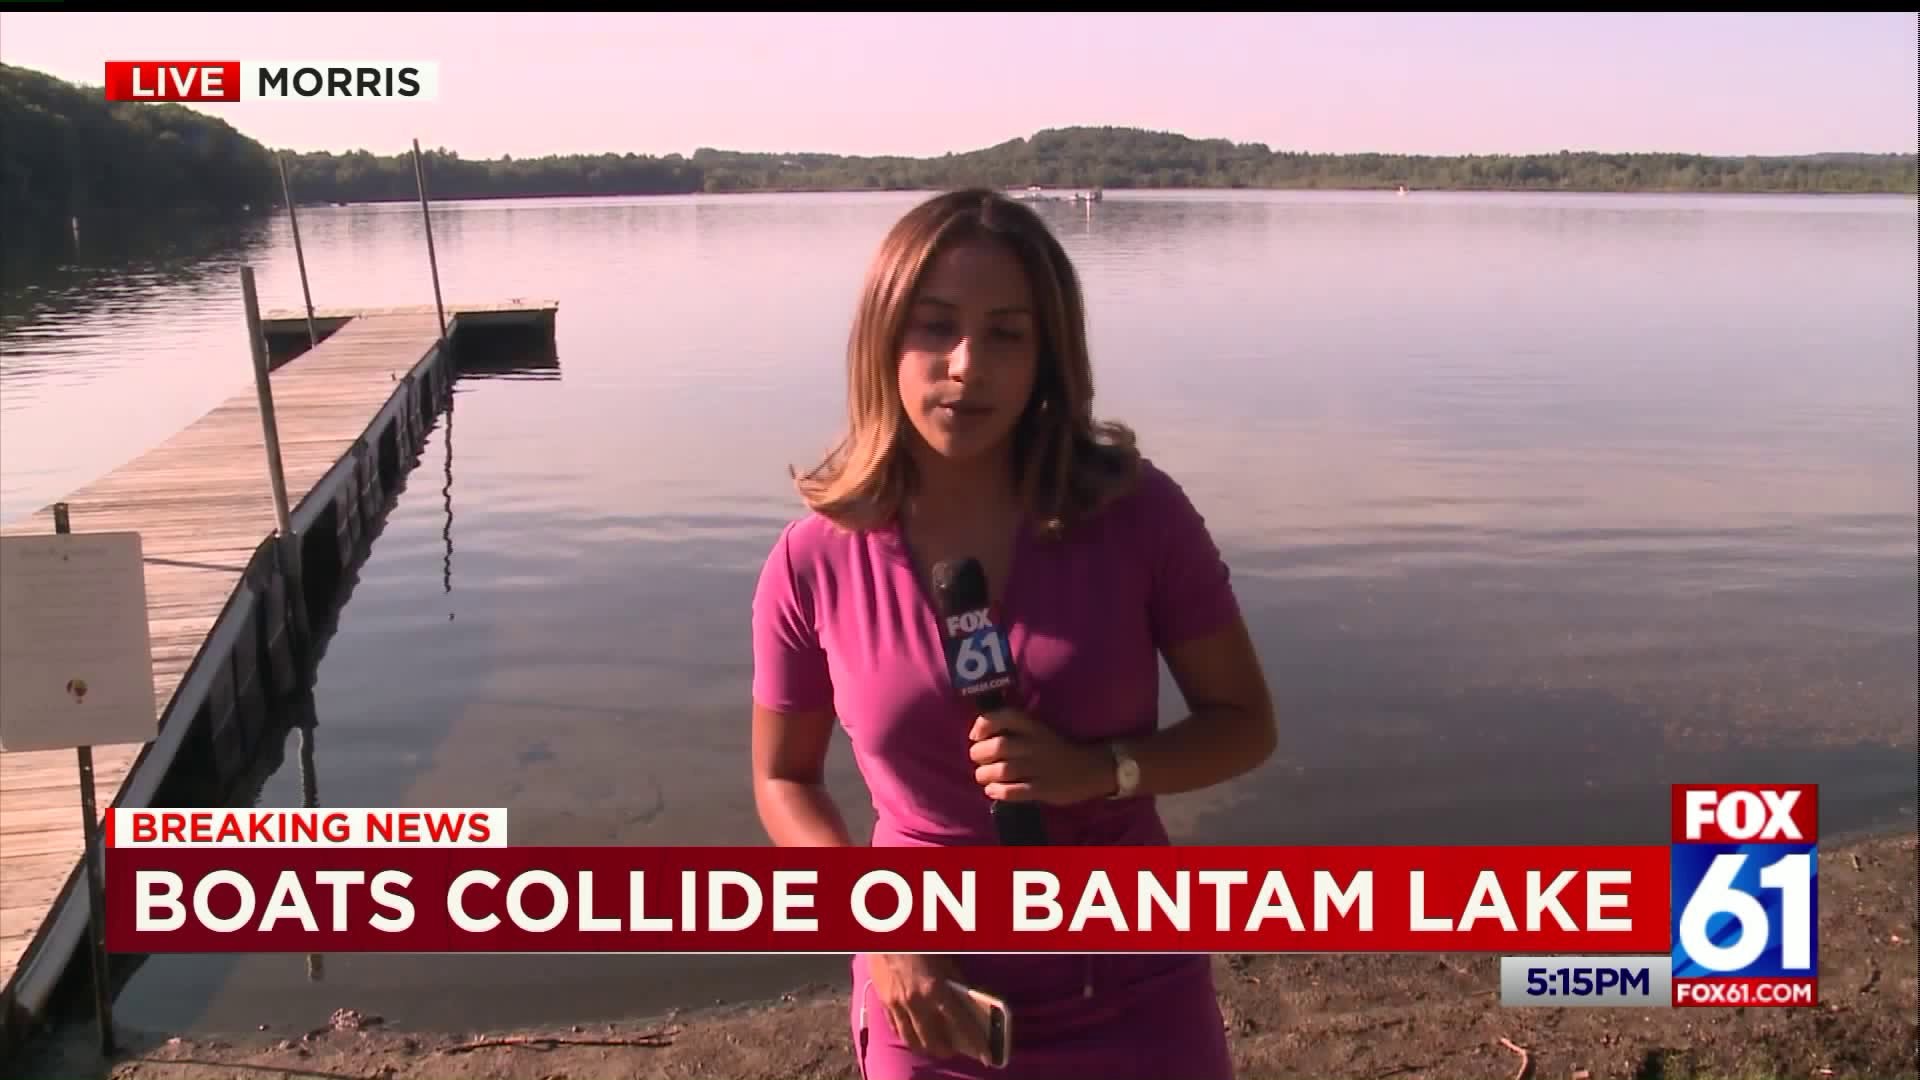 Officials responded to boat collision on Bantam Lake